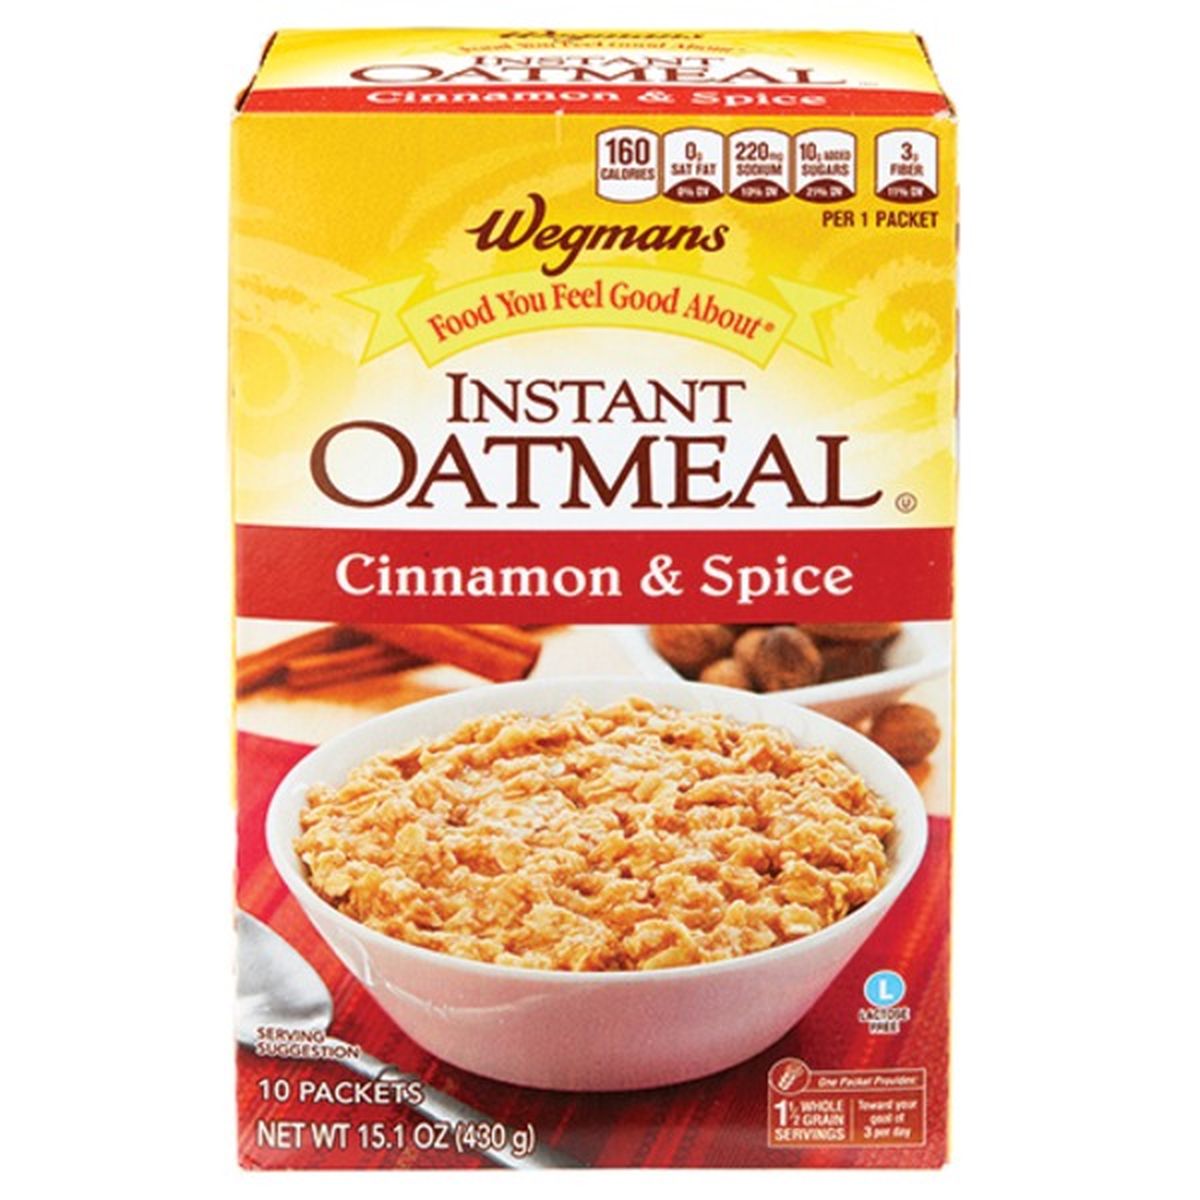 Calories in Wegmans Instant Oatmeal, Cinnamon & Spice, 10 Packets